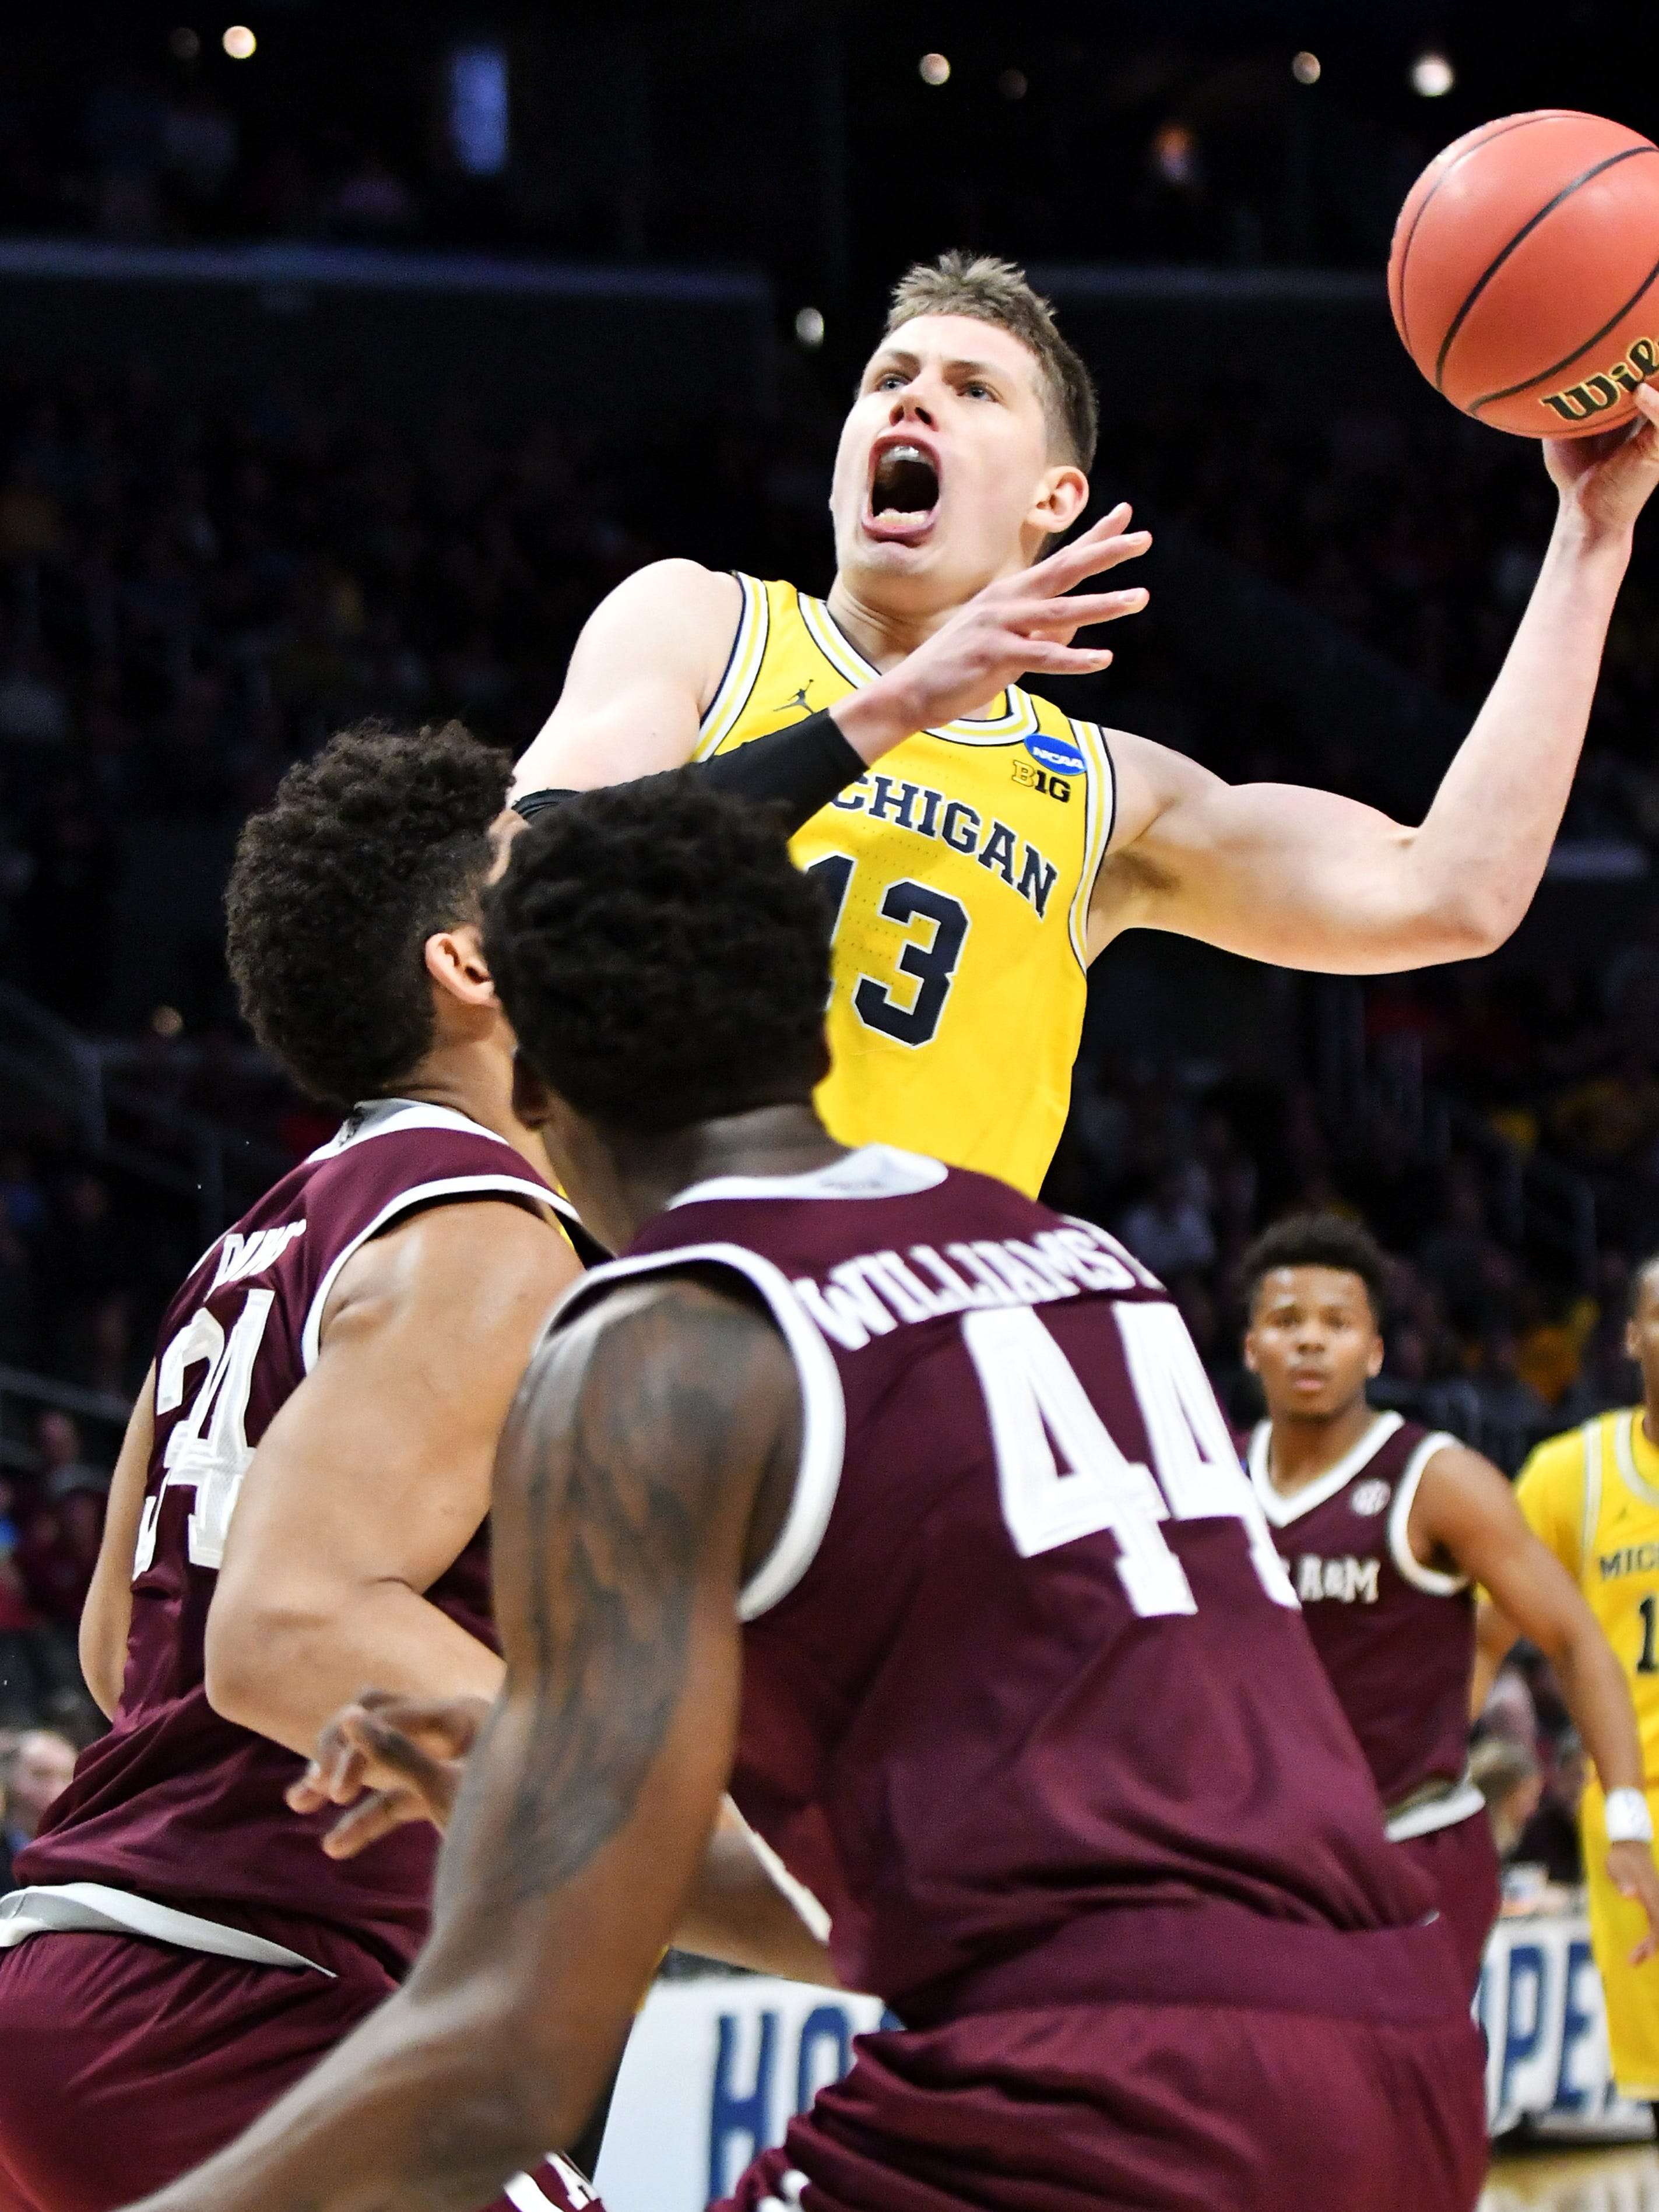 29. Brooklyn Nets: Moritz Wagner, PF, Jr., Michigan. The Nets have a couple of Wolverines already in Caris LeVert and Nik Stauskas, and Wagner would be another good fit for them. He's a floor-stretching big who came back for his junior year and led Michigan to the title game. Wagner worked on his rebounding but his defense still needs some work.